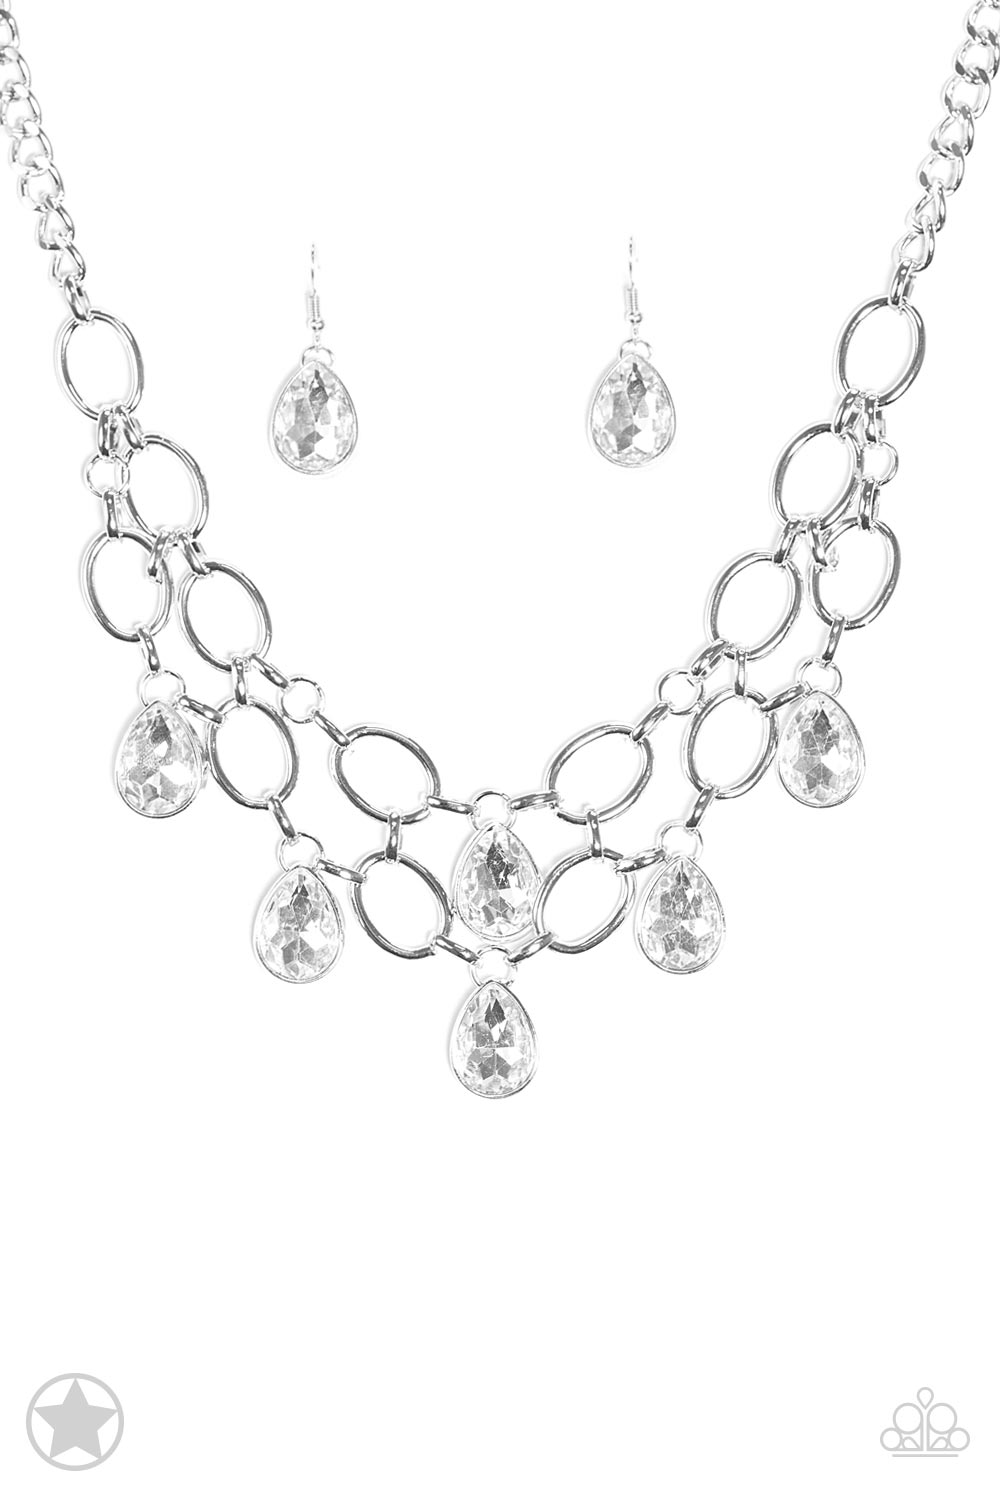 Show - Stopping Shimmer - Gem Silver Fashion Necklace - Paparazzi Accessories - Fashion necklace with two rows of silver chain layer below the collar for a fierce fashion. Glittery white teardrops gems hang from the glistening layers for a timeless shimmer to the show-stopping statement style. Necklace has an adjustable clasp closure. Bejeweled Accessories By Kristie